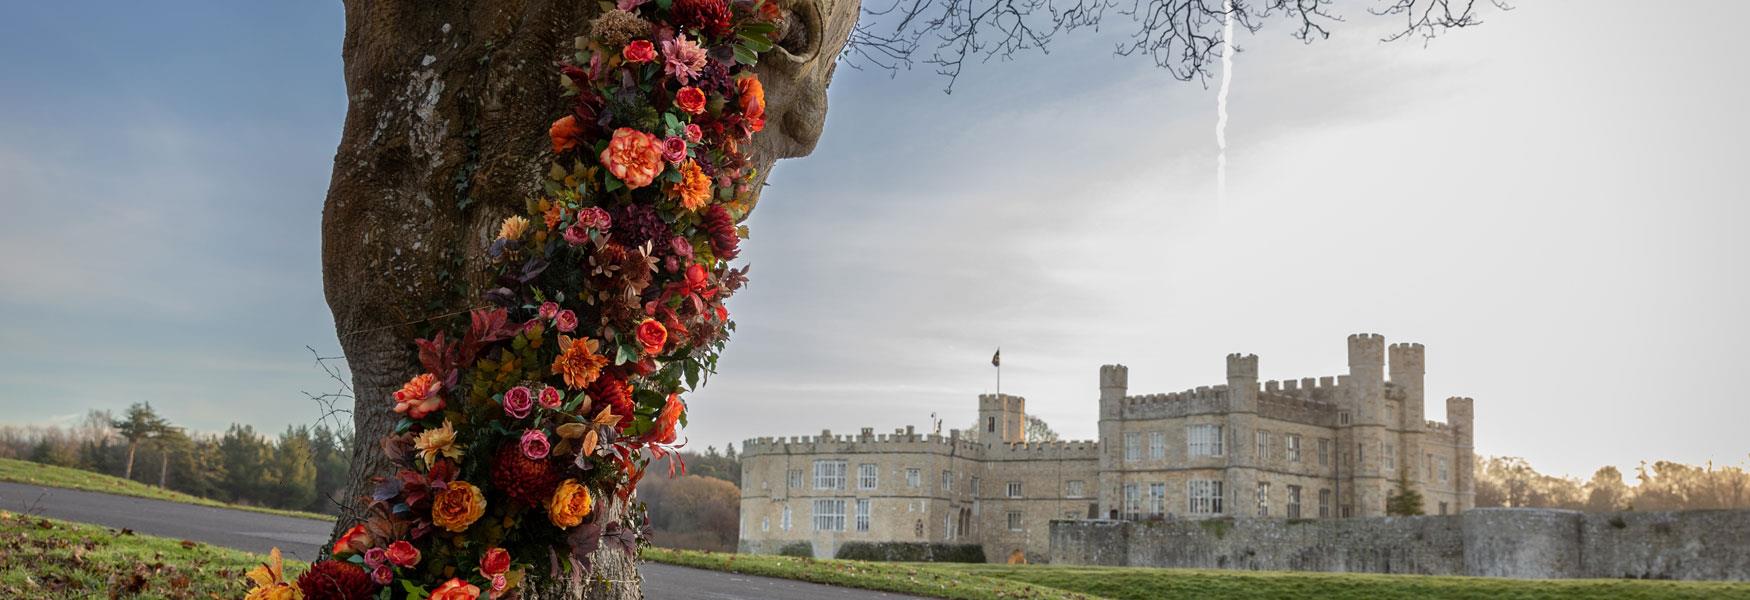 Halloween and half-term at Leeds Castle offers some great family entertainment. Discover a great family quest.